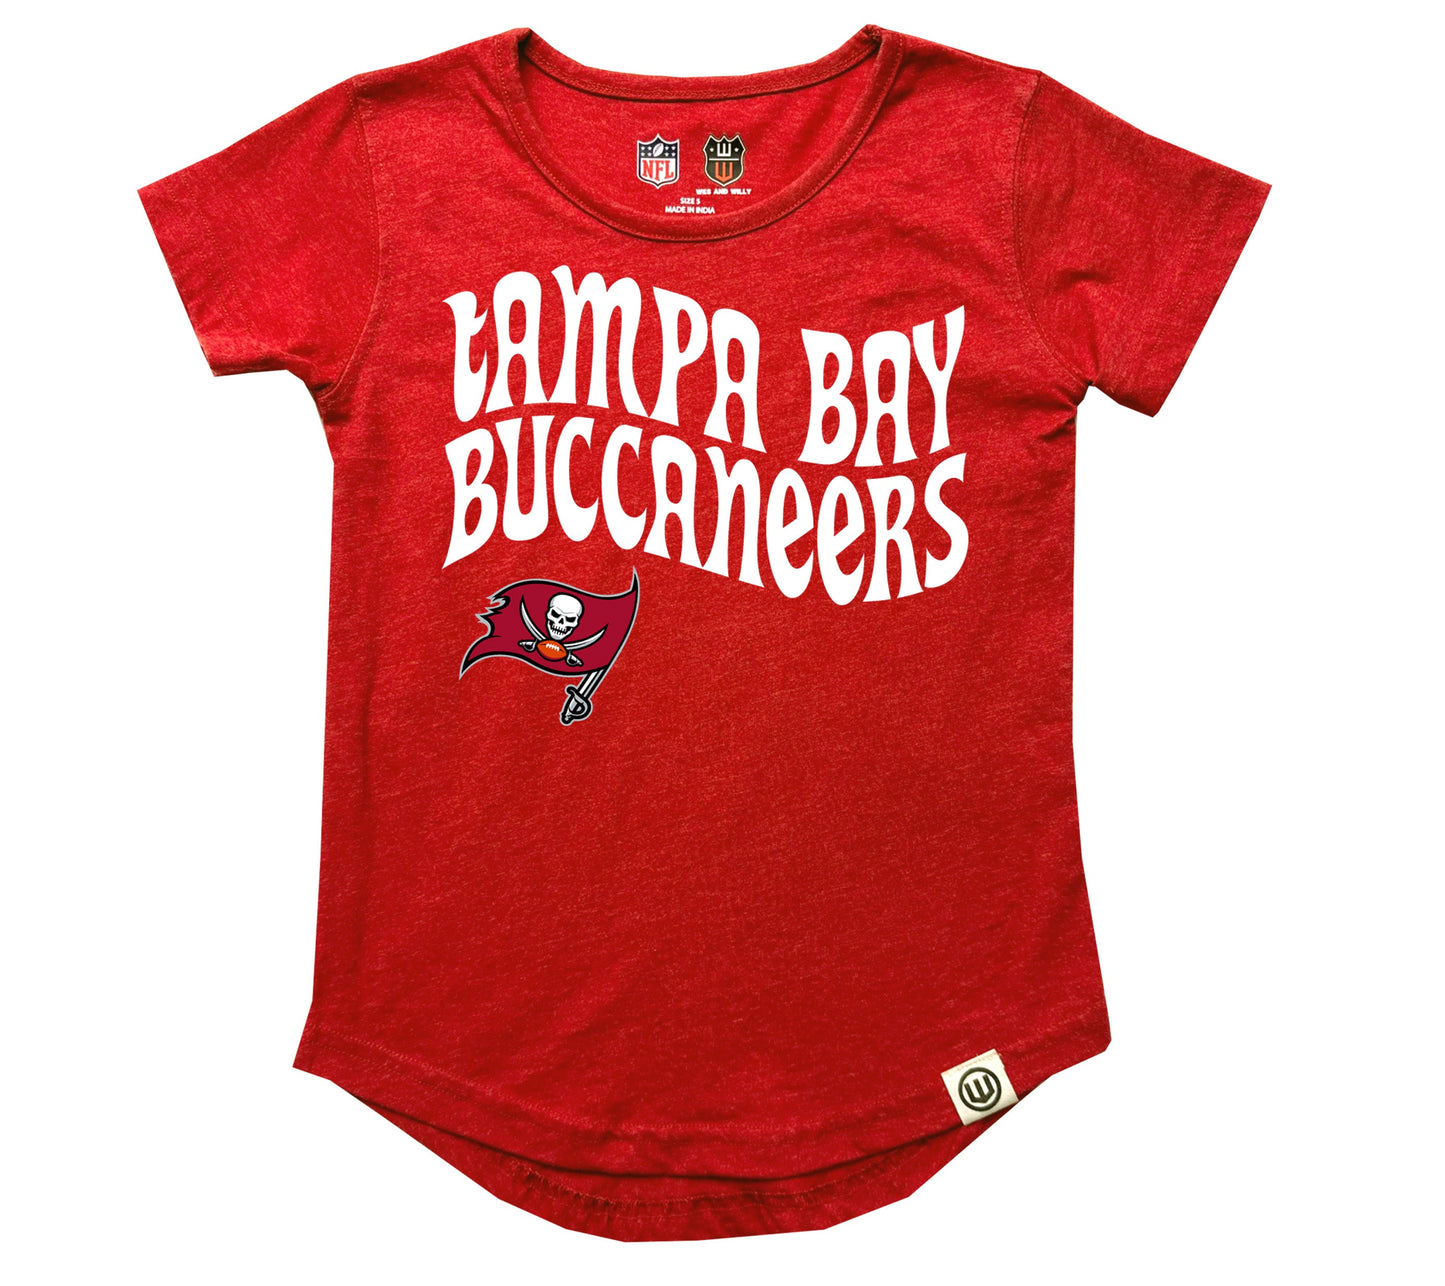 Tampa Bay Buccaneers NFL youth Burnout T-Shirt